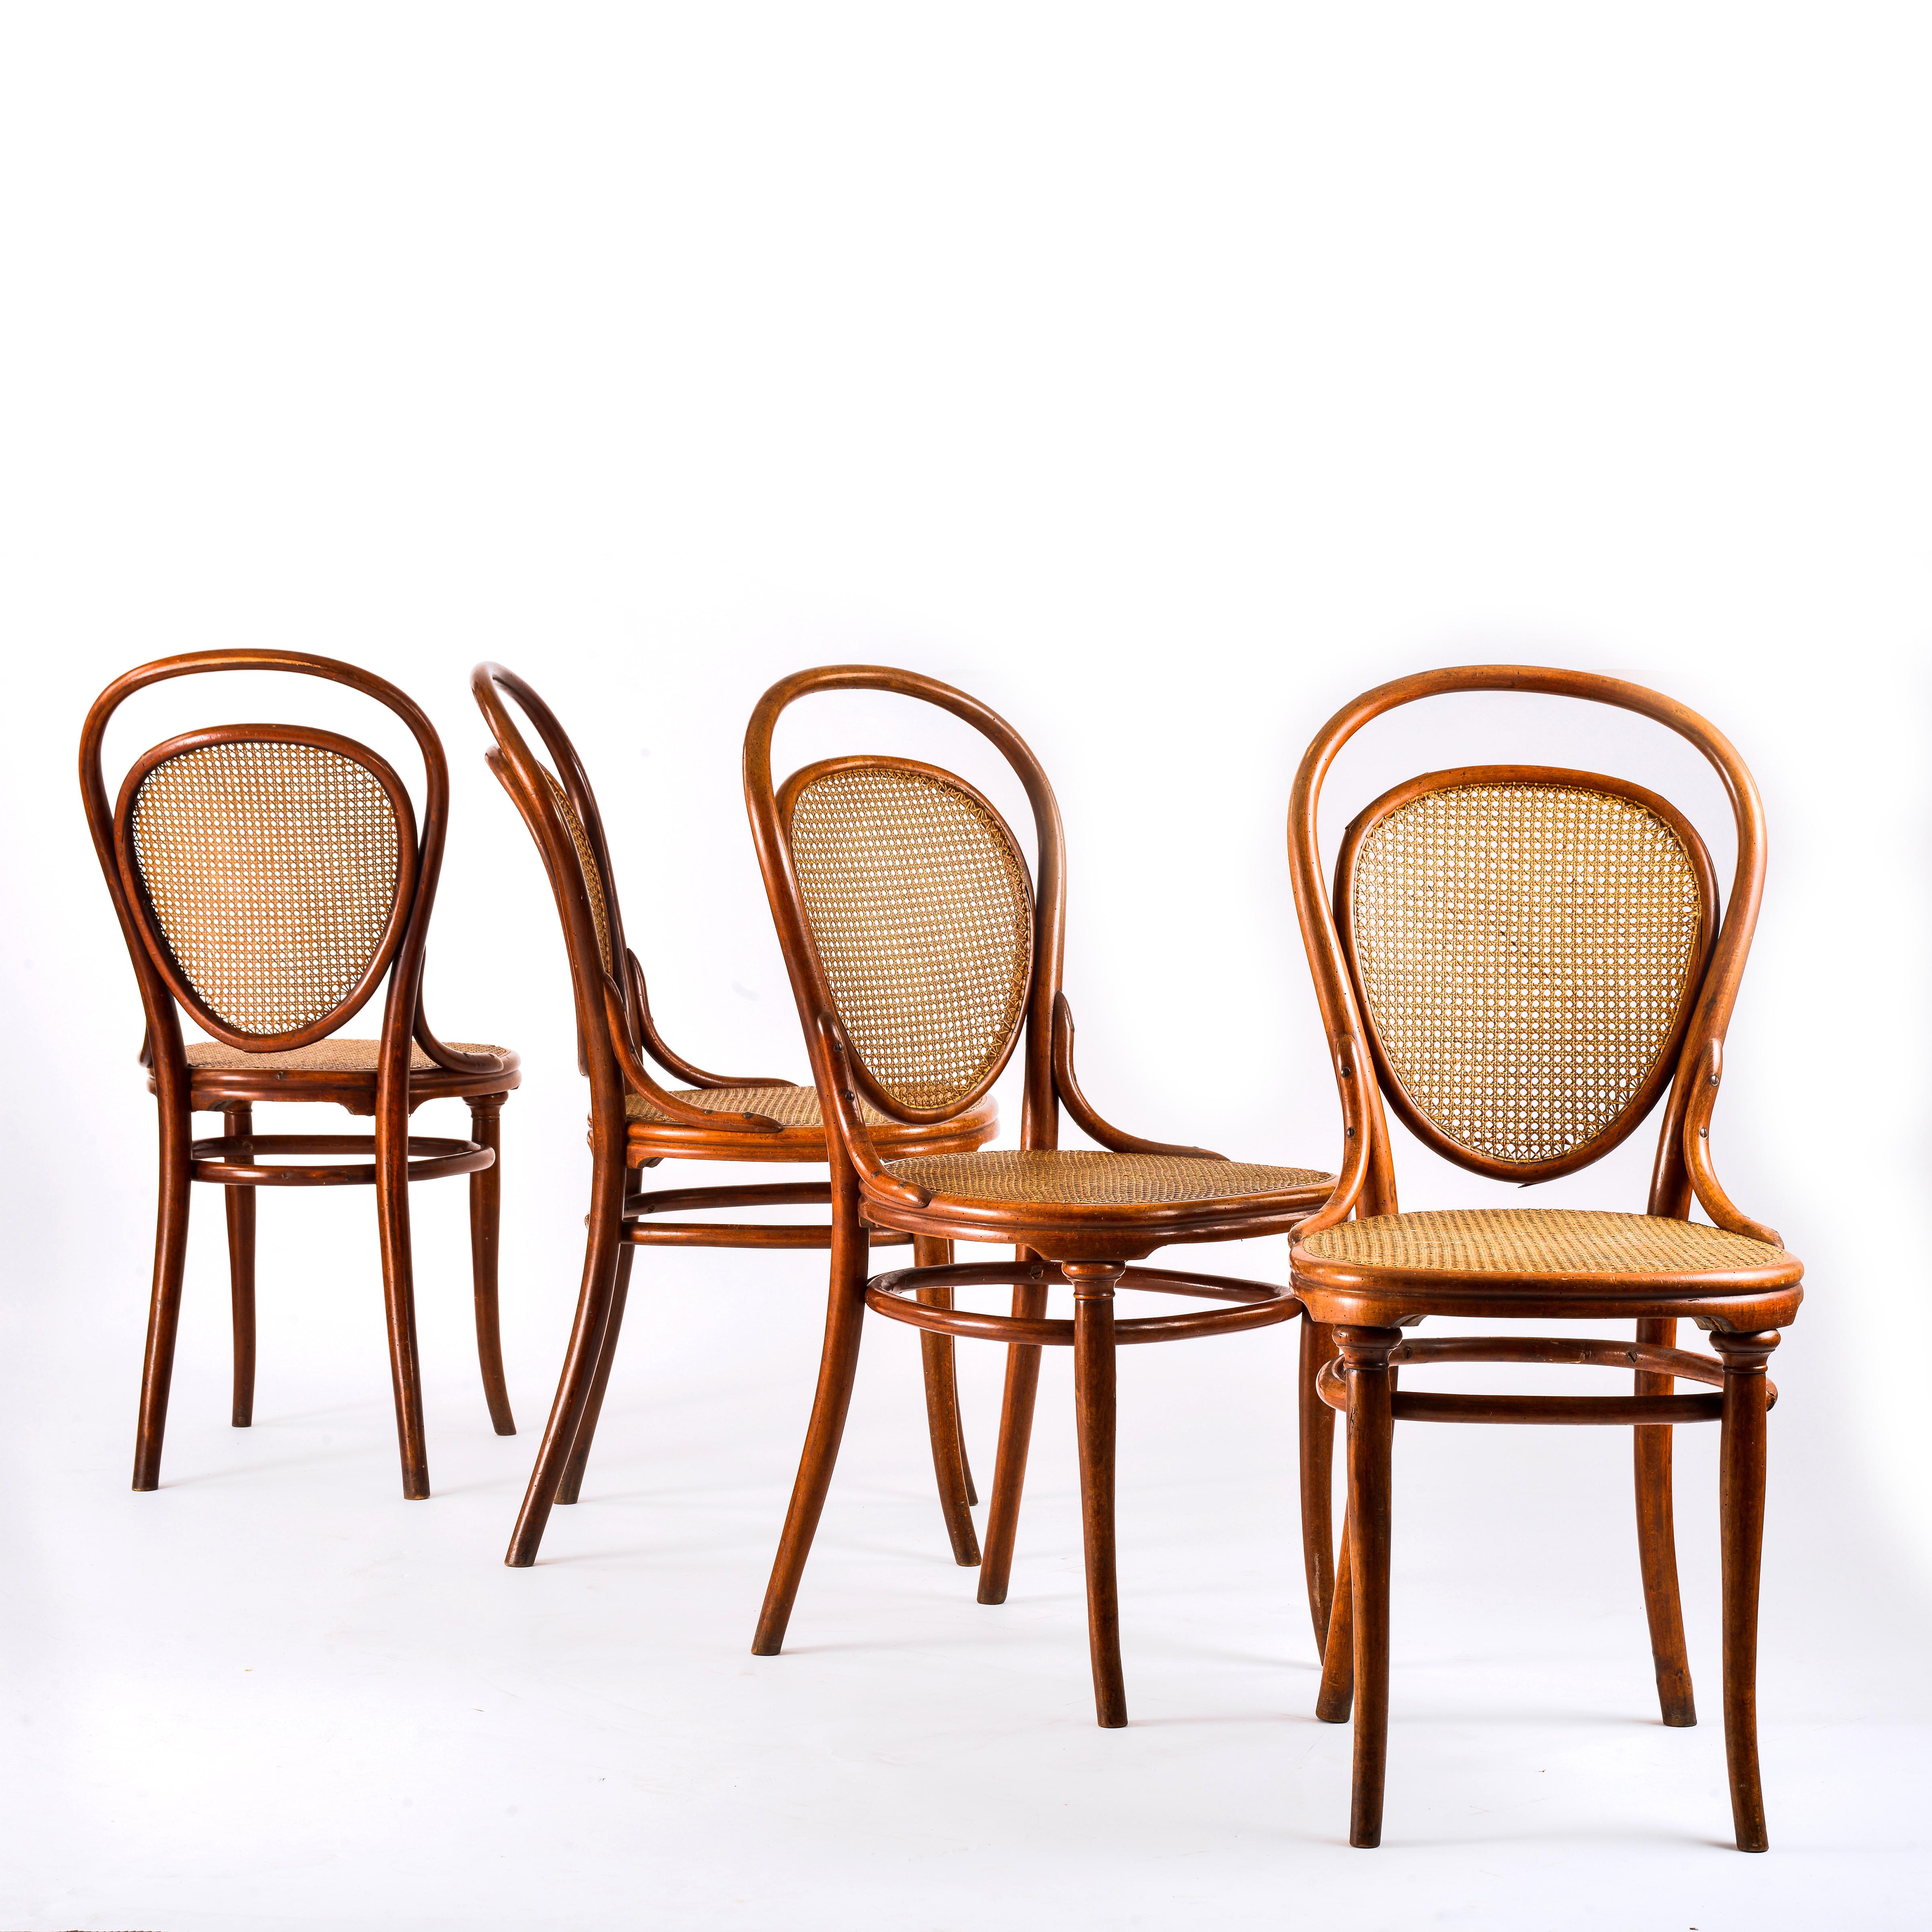 Suite of 4 chairs, number 7, published by Thonet at the end of the 19th century. Curved and stained beech wood typical of the manufacture's production, top of the front legs molded, caned seat and openwork back with oval panel also caned. Presence